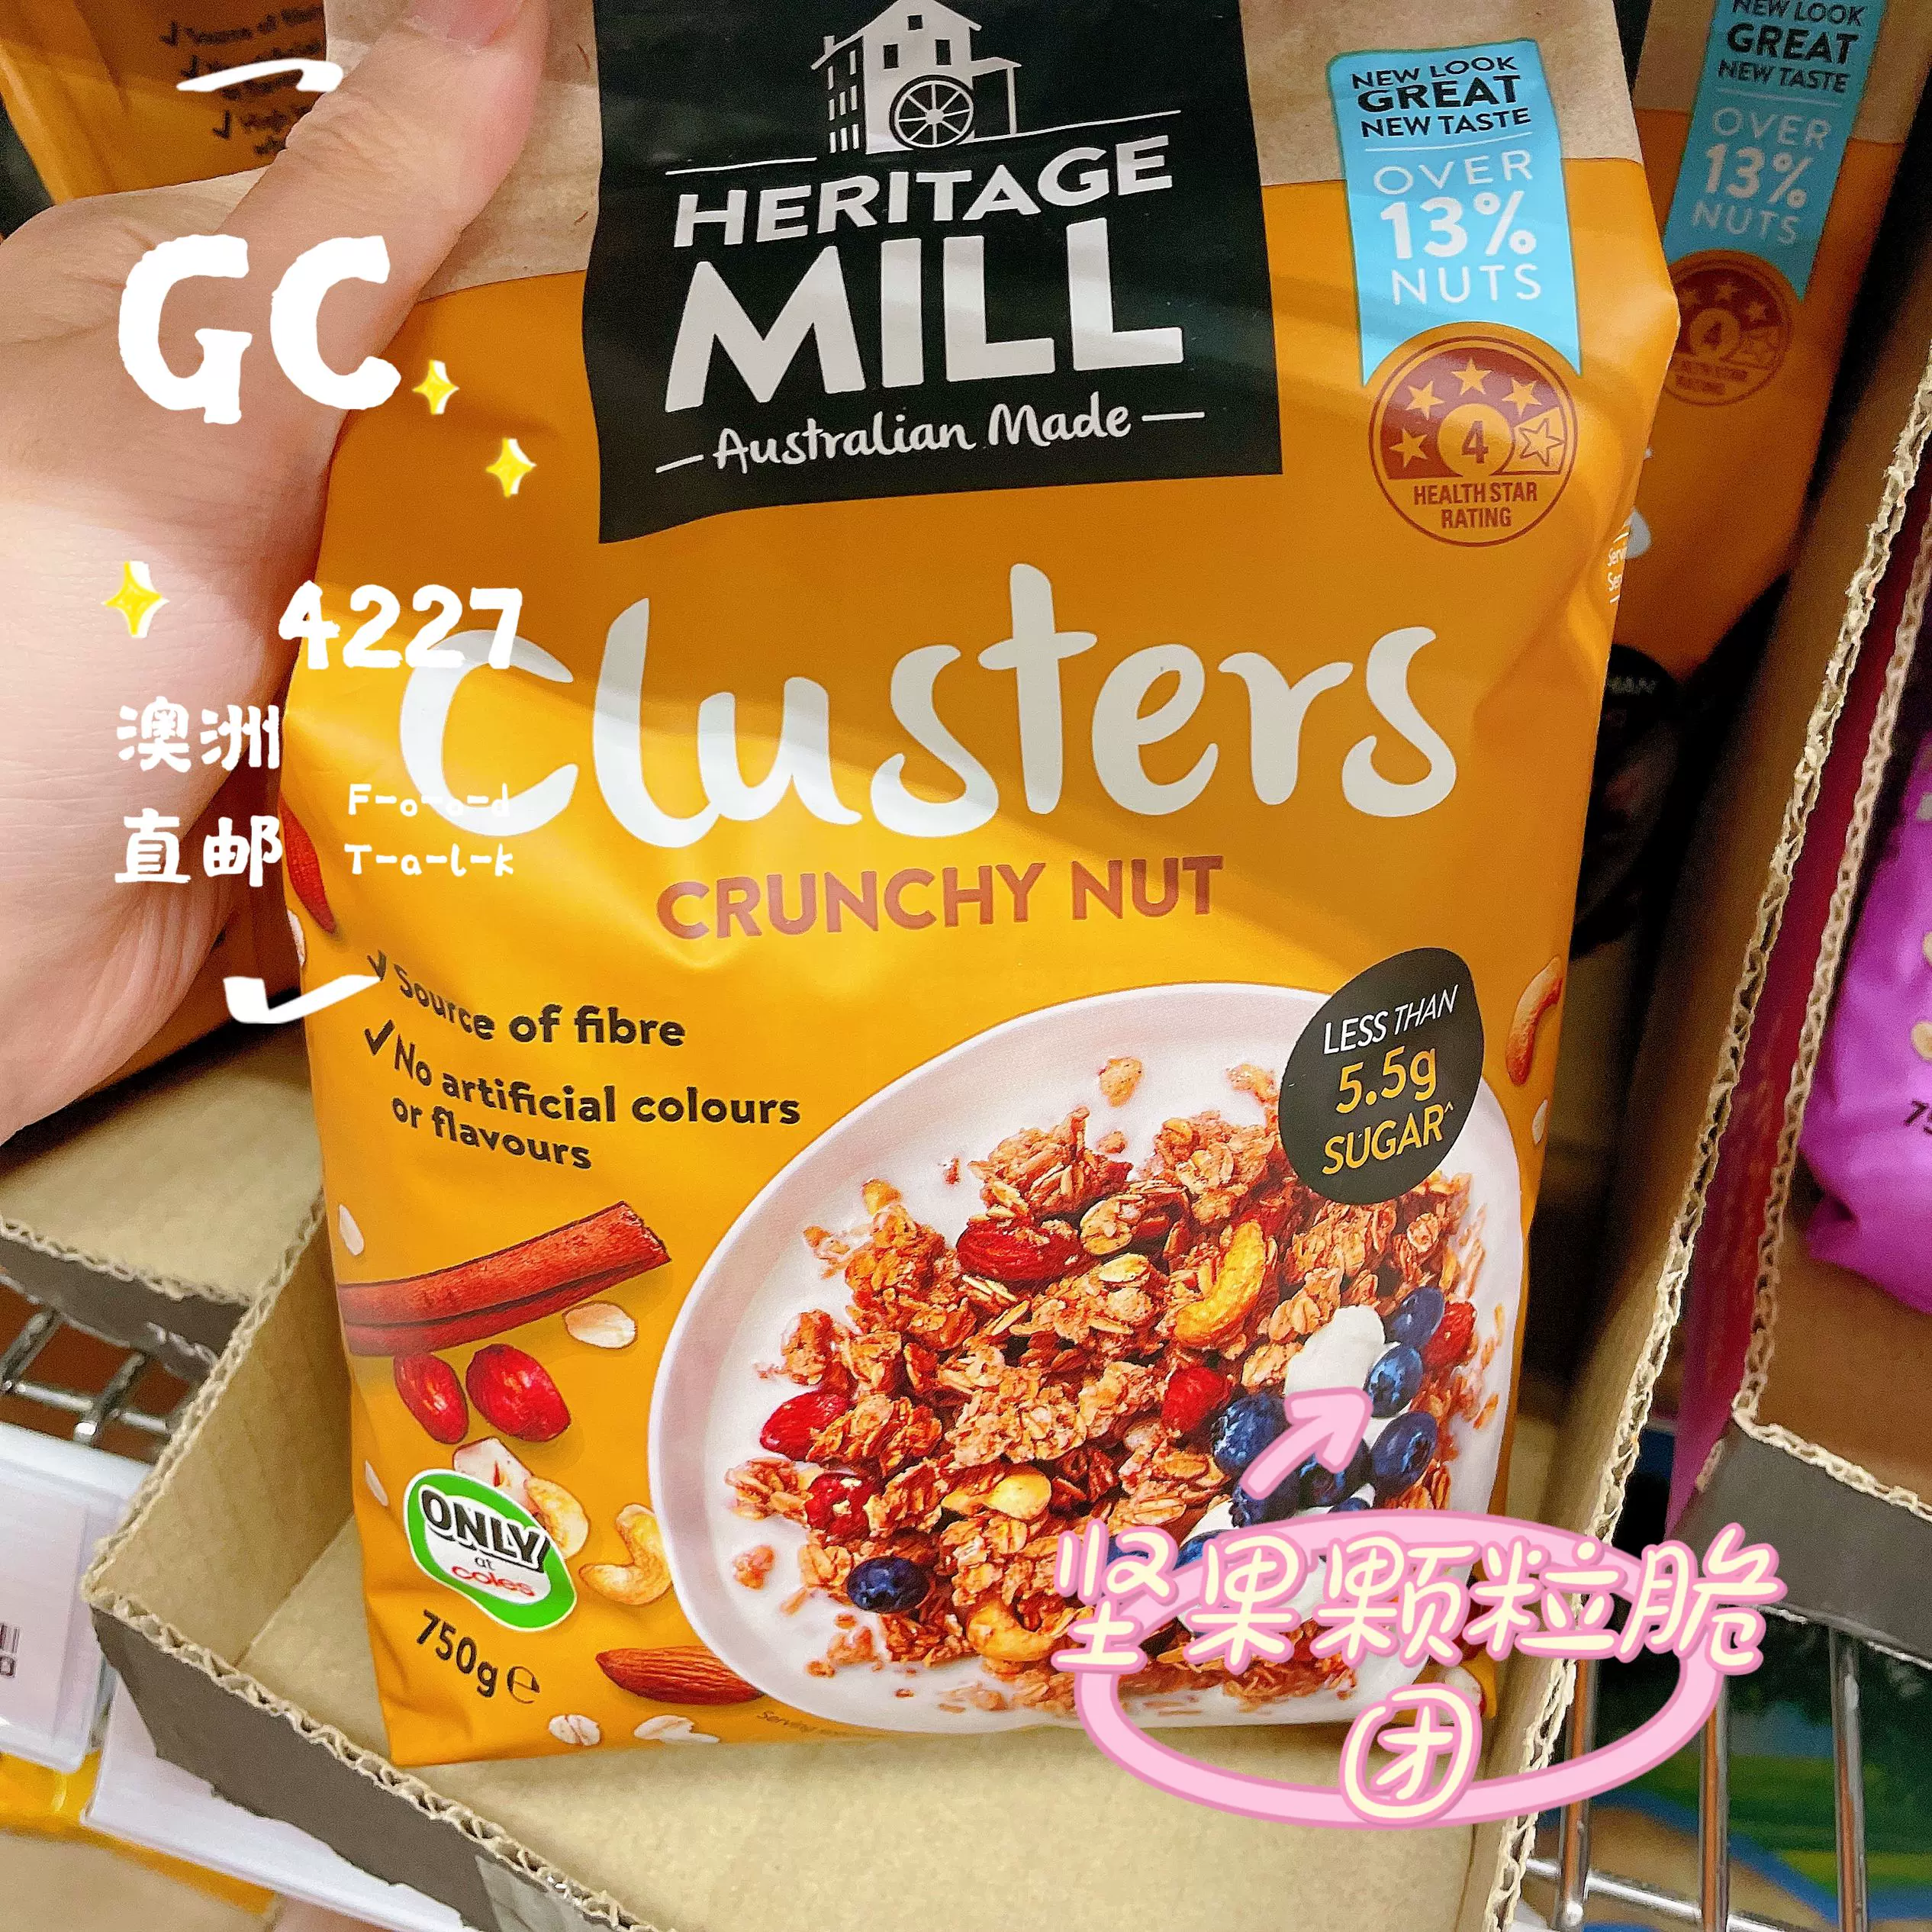 Buy Heritage Mill Clusters Crunchy Nut 750g